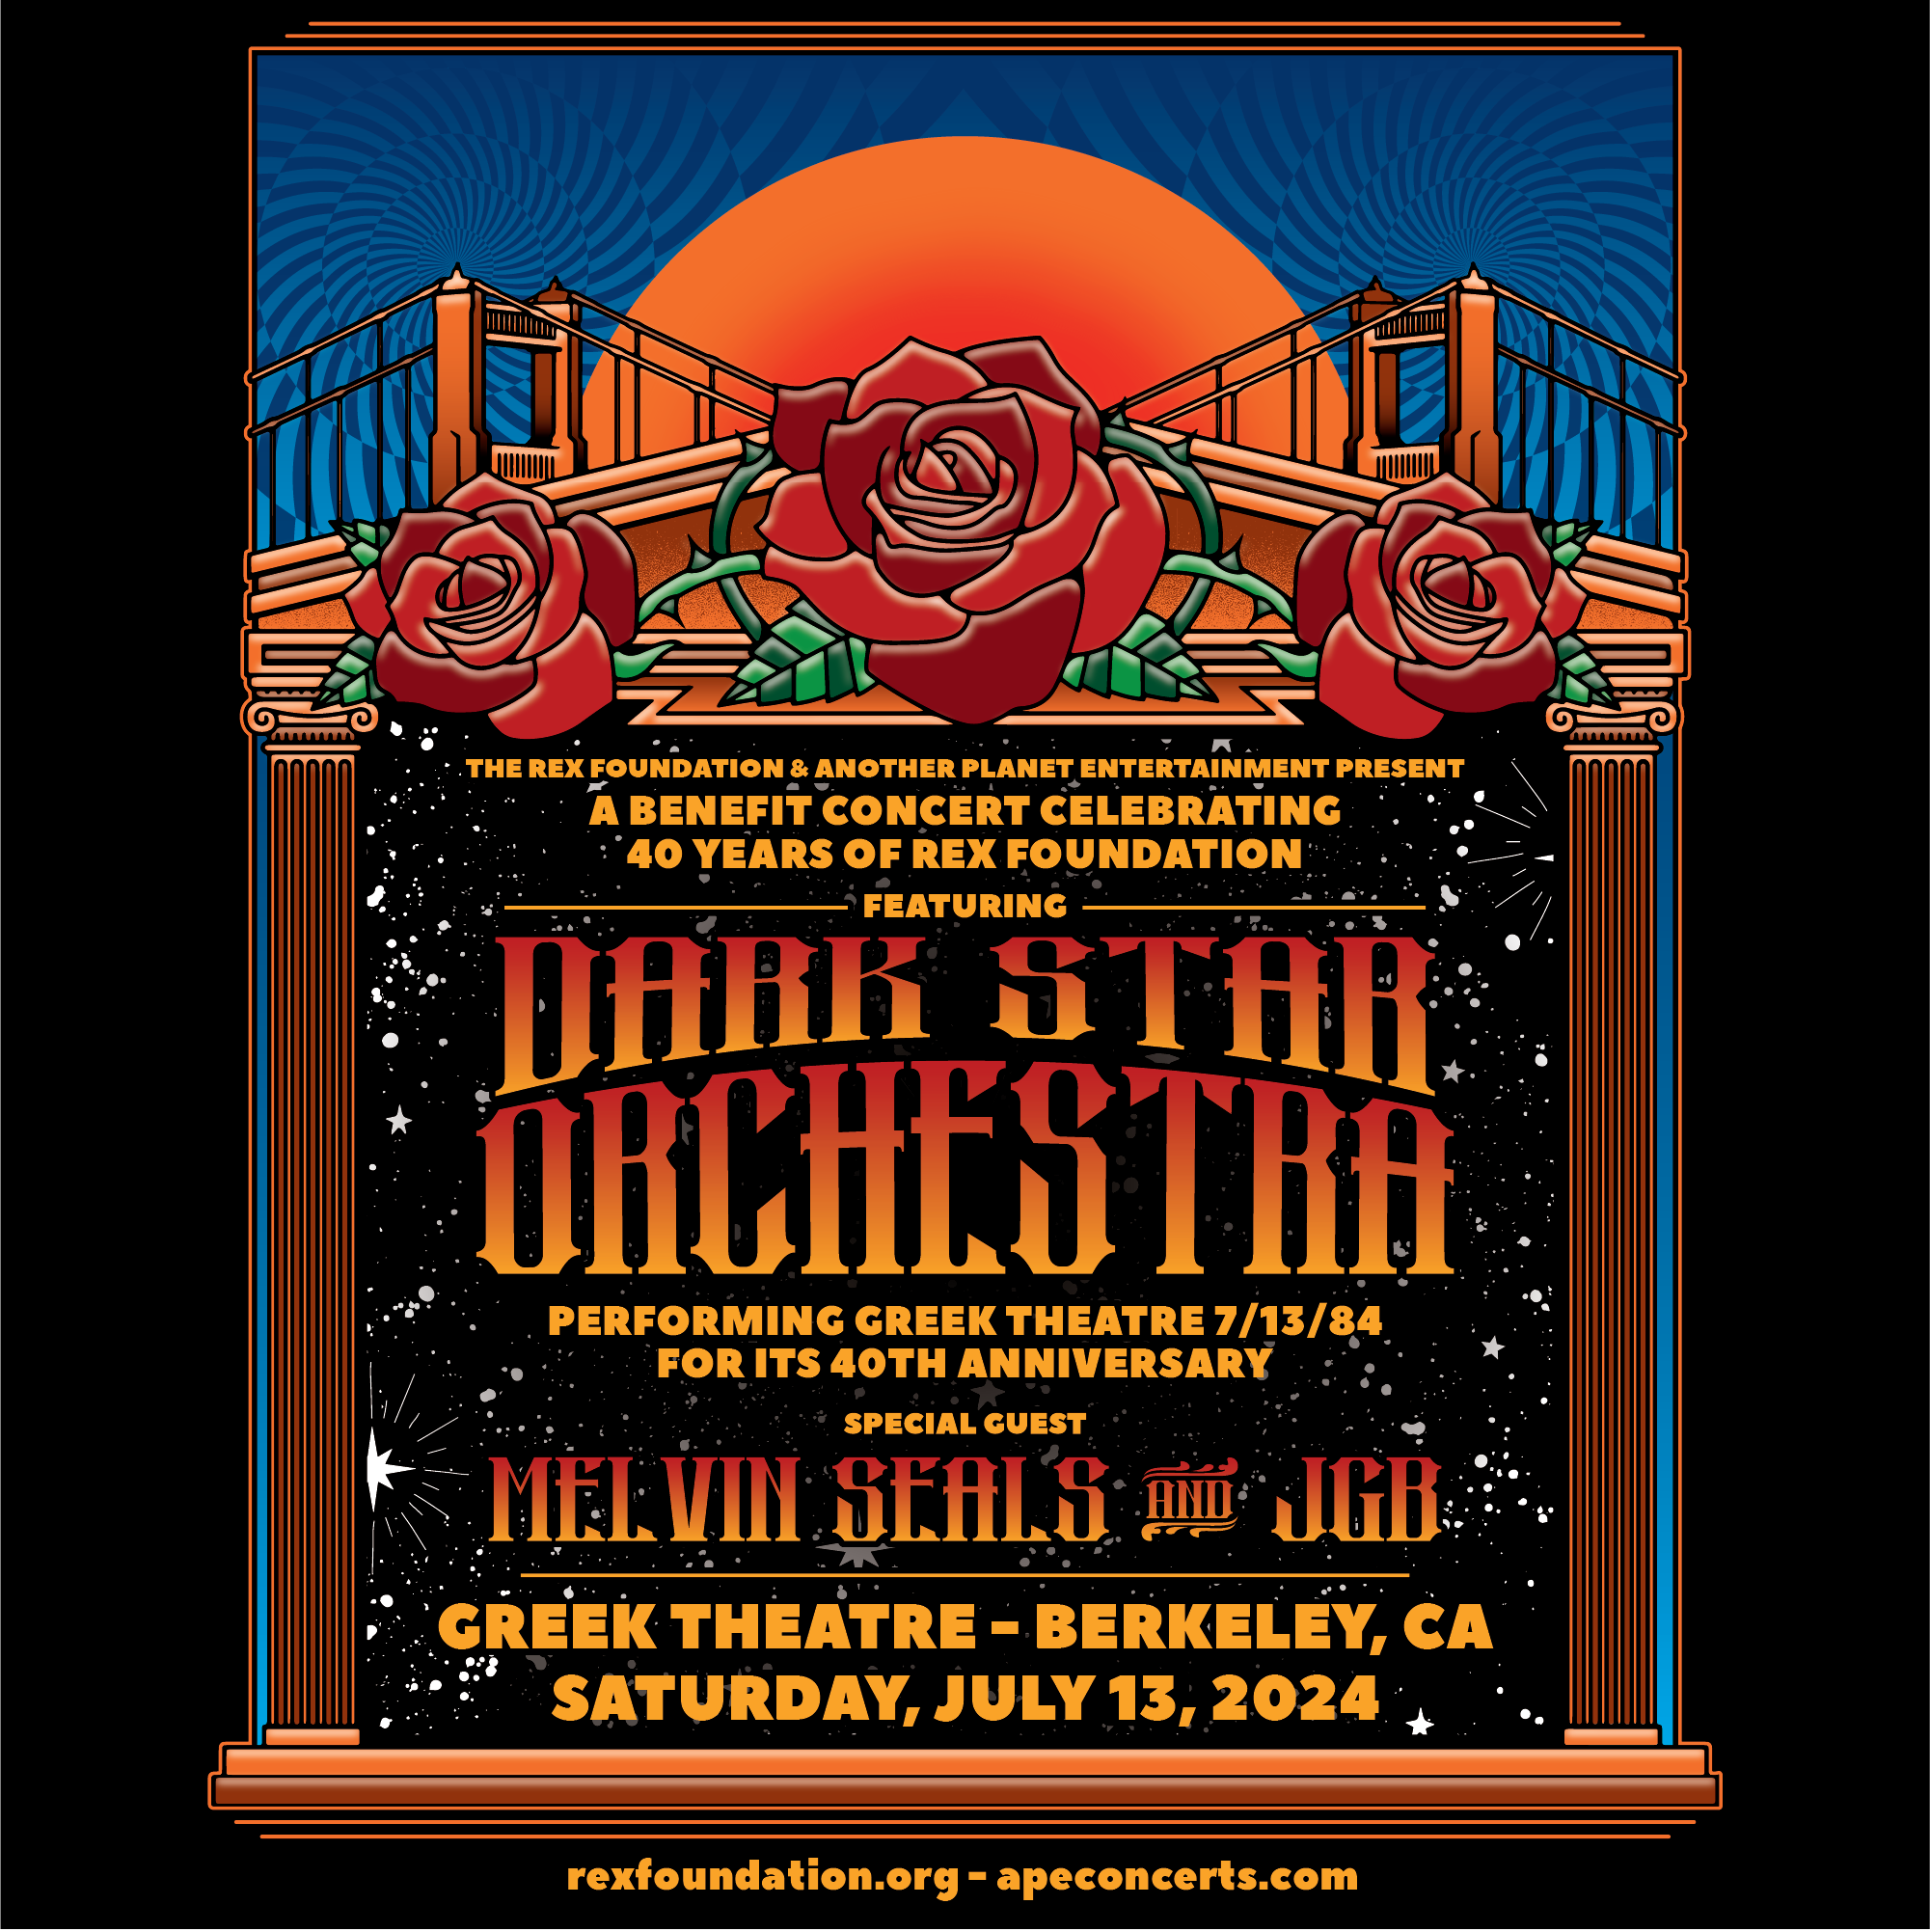 Celebrate Rex's 40th Anniversary at The Greek Theatre with Dark Star Orchestra, Melvin Seals and JGB!